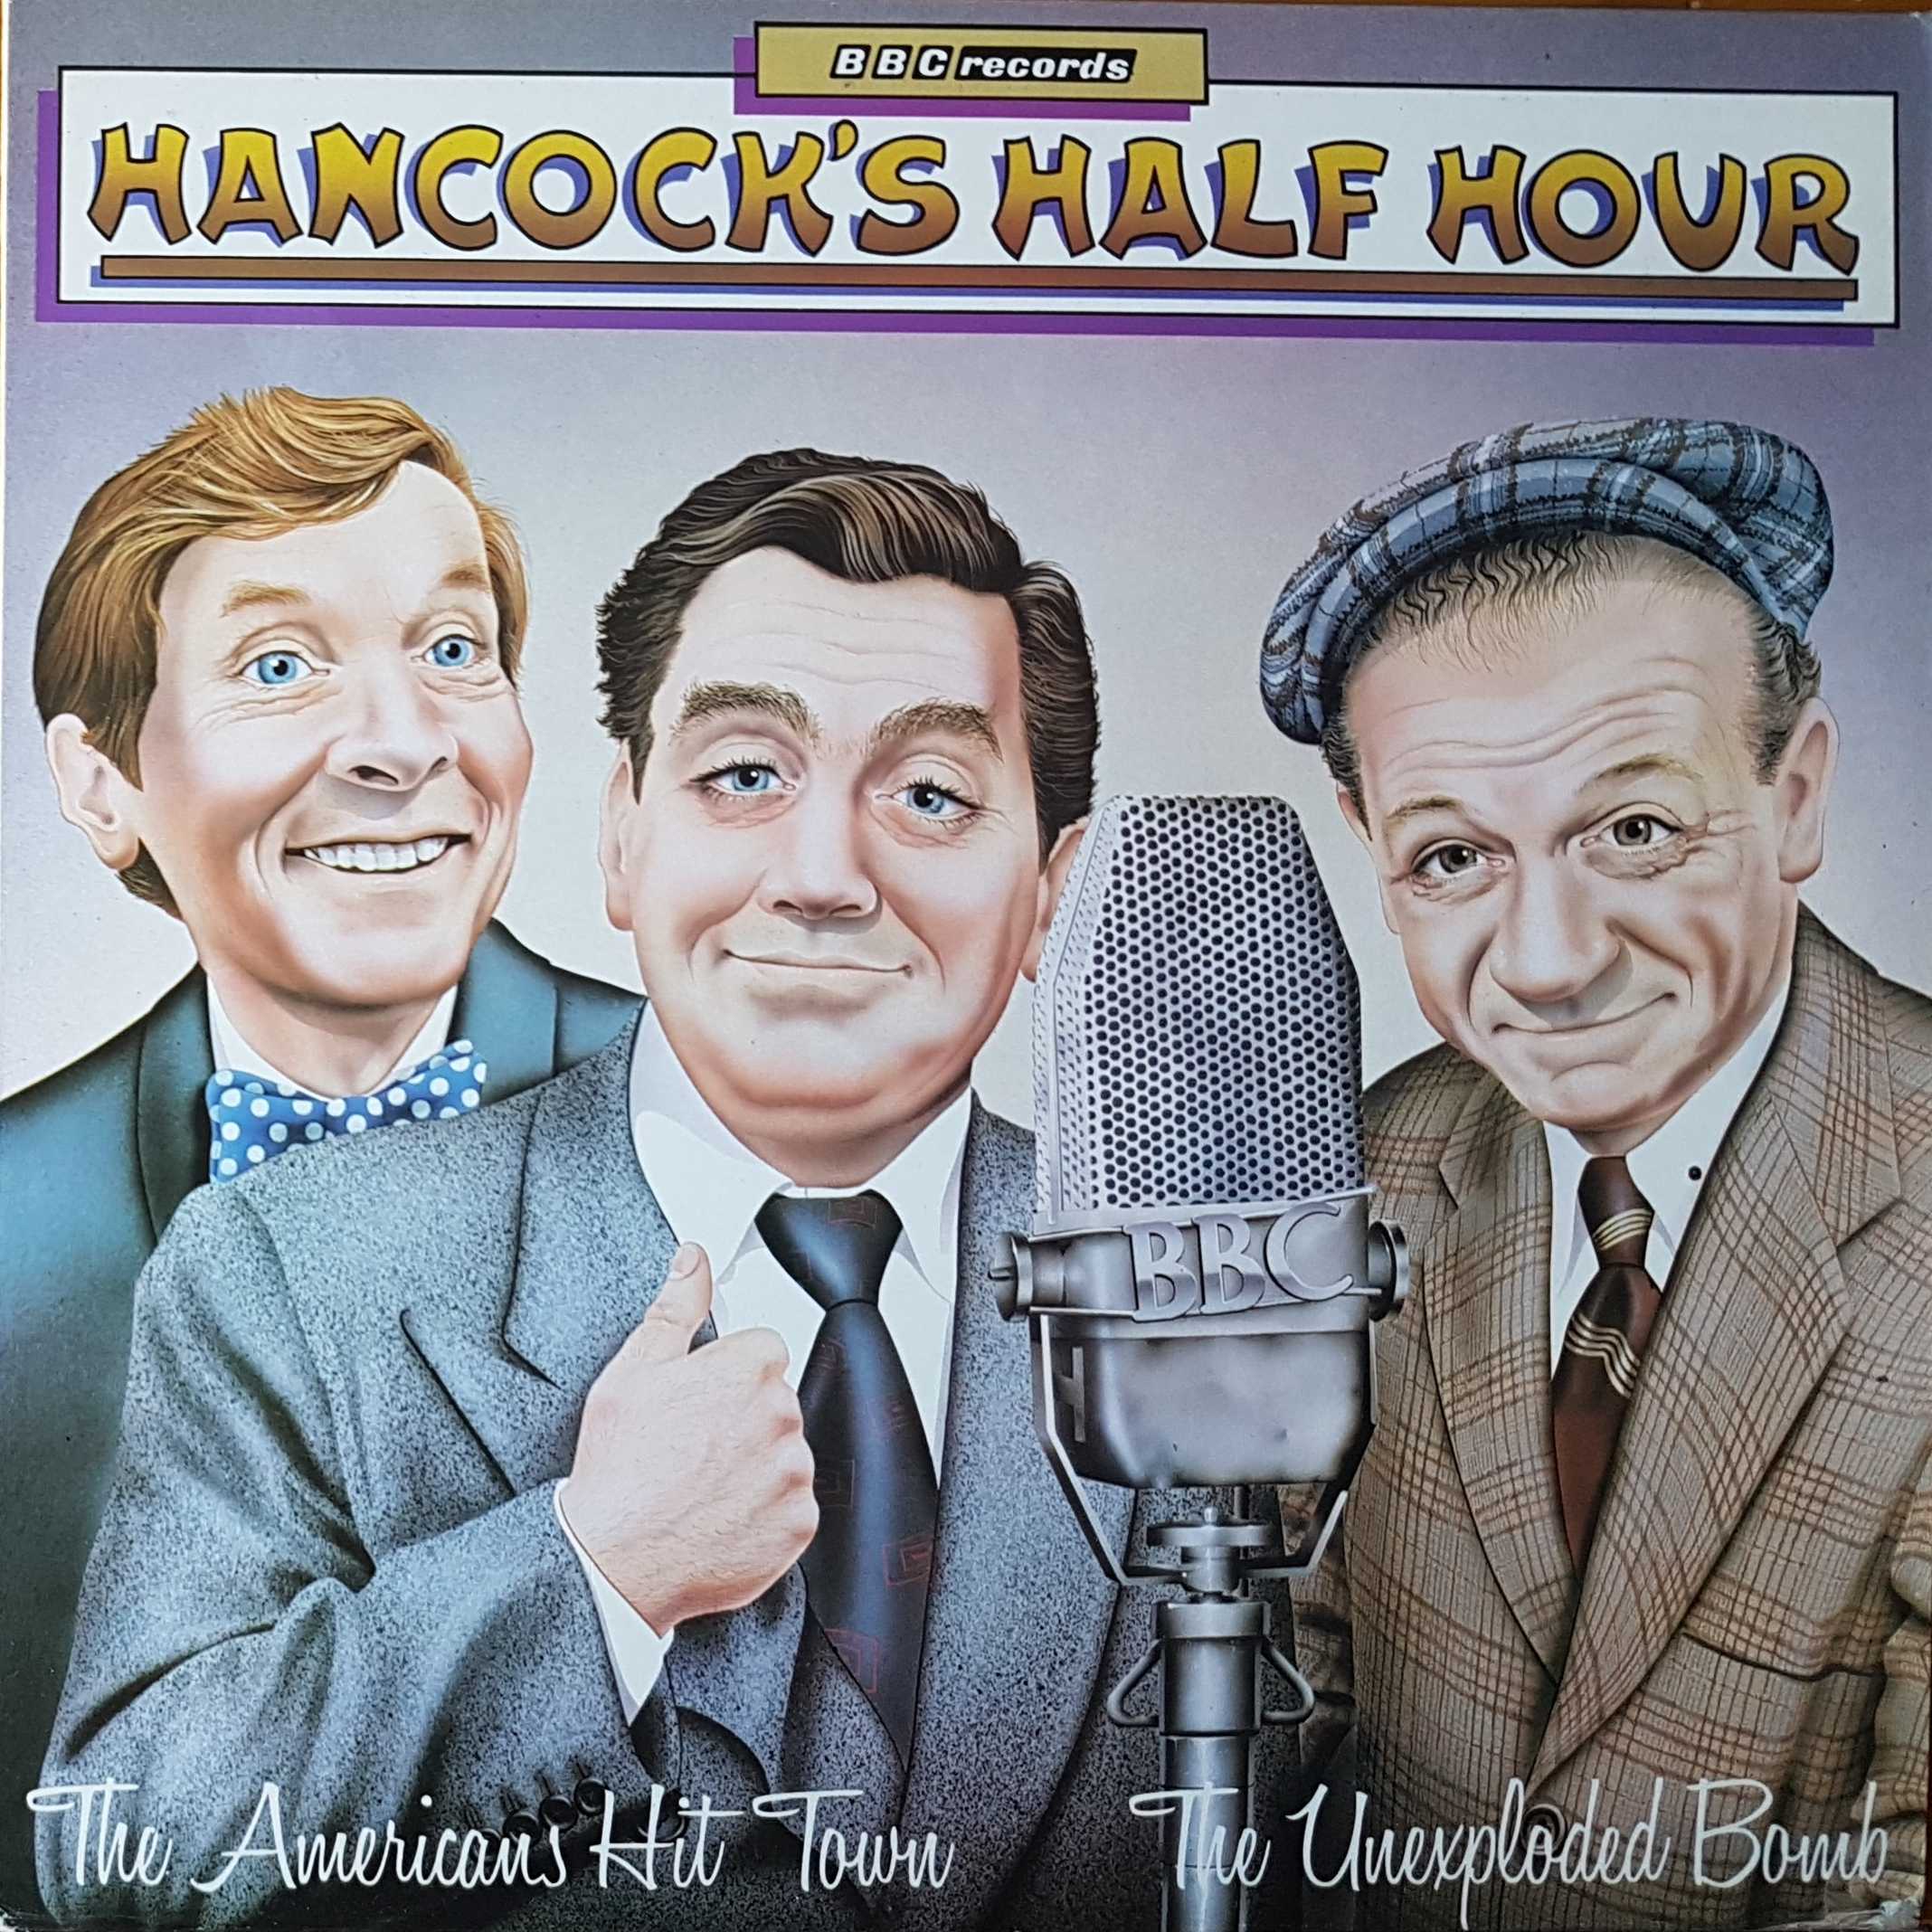 Picture of REB 423 Hancock's half hour - Volume 2 by artist Tony Hancock from the BBC albums - Records and Tapes library